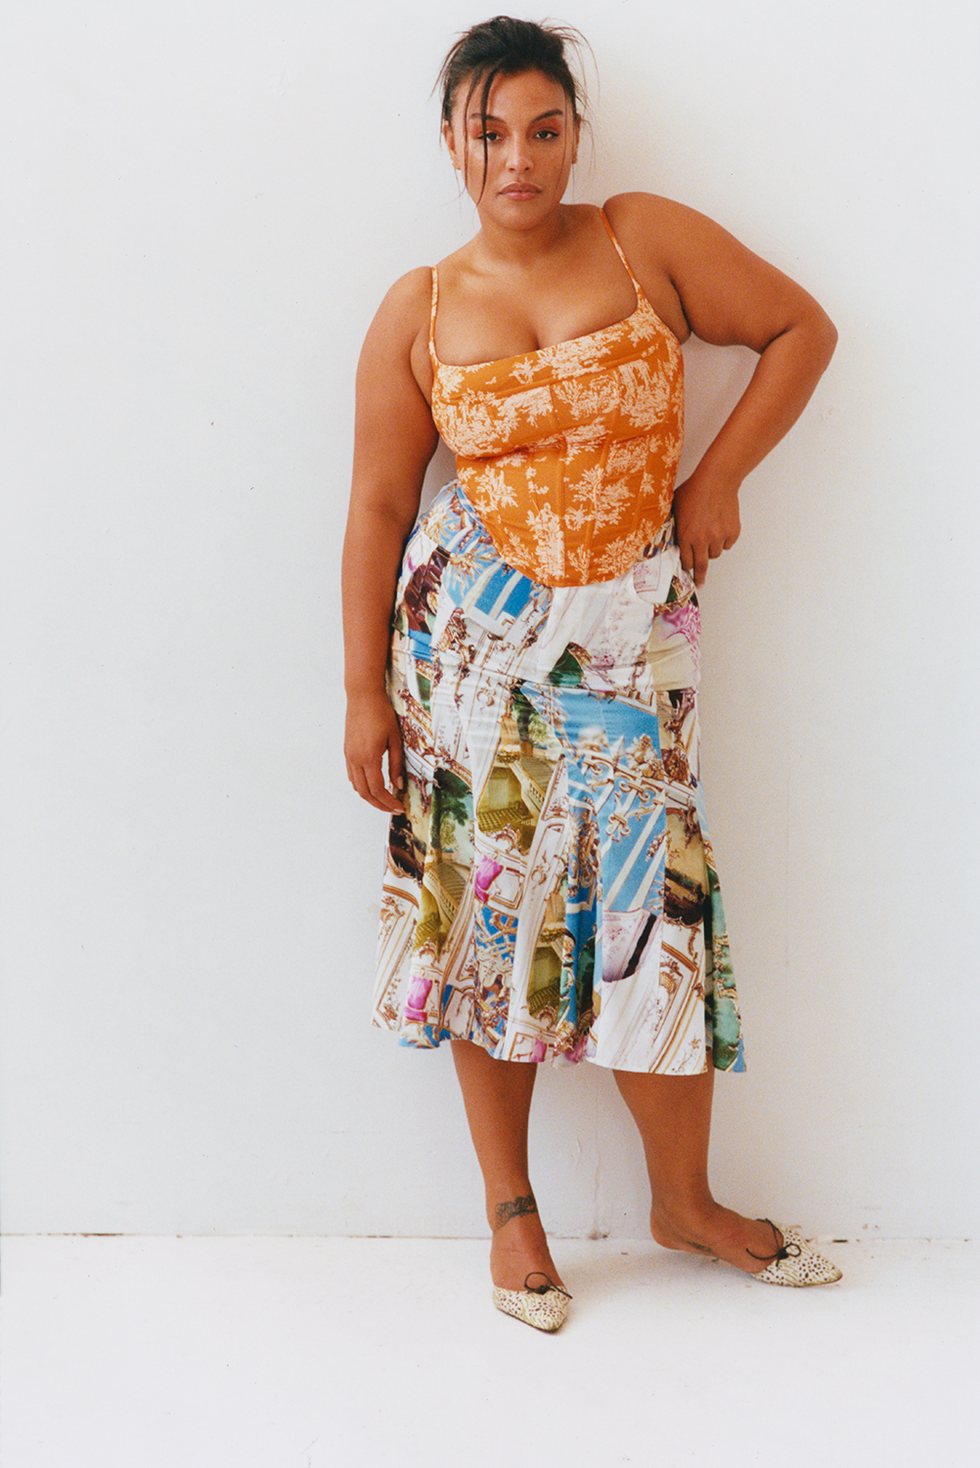 paloma elsesser wears a miaou top and printed skirt to illustrate a news story about miaou extending sizes